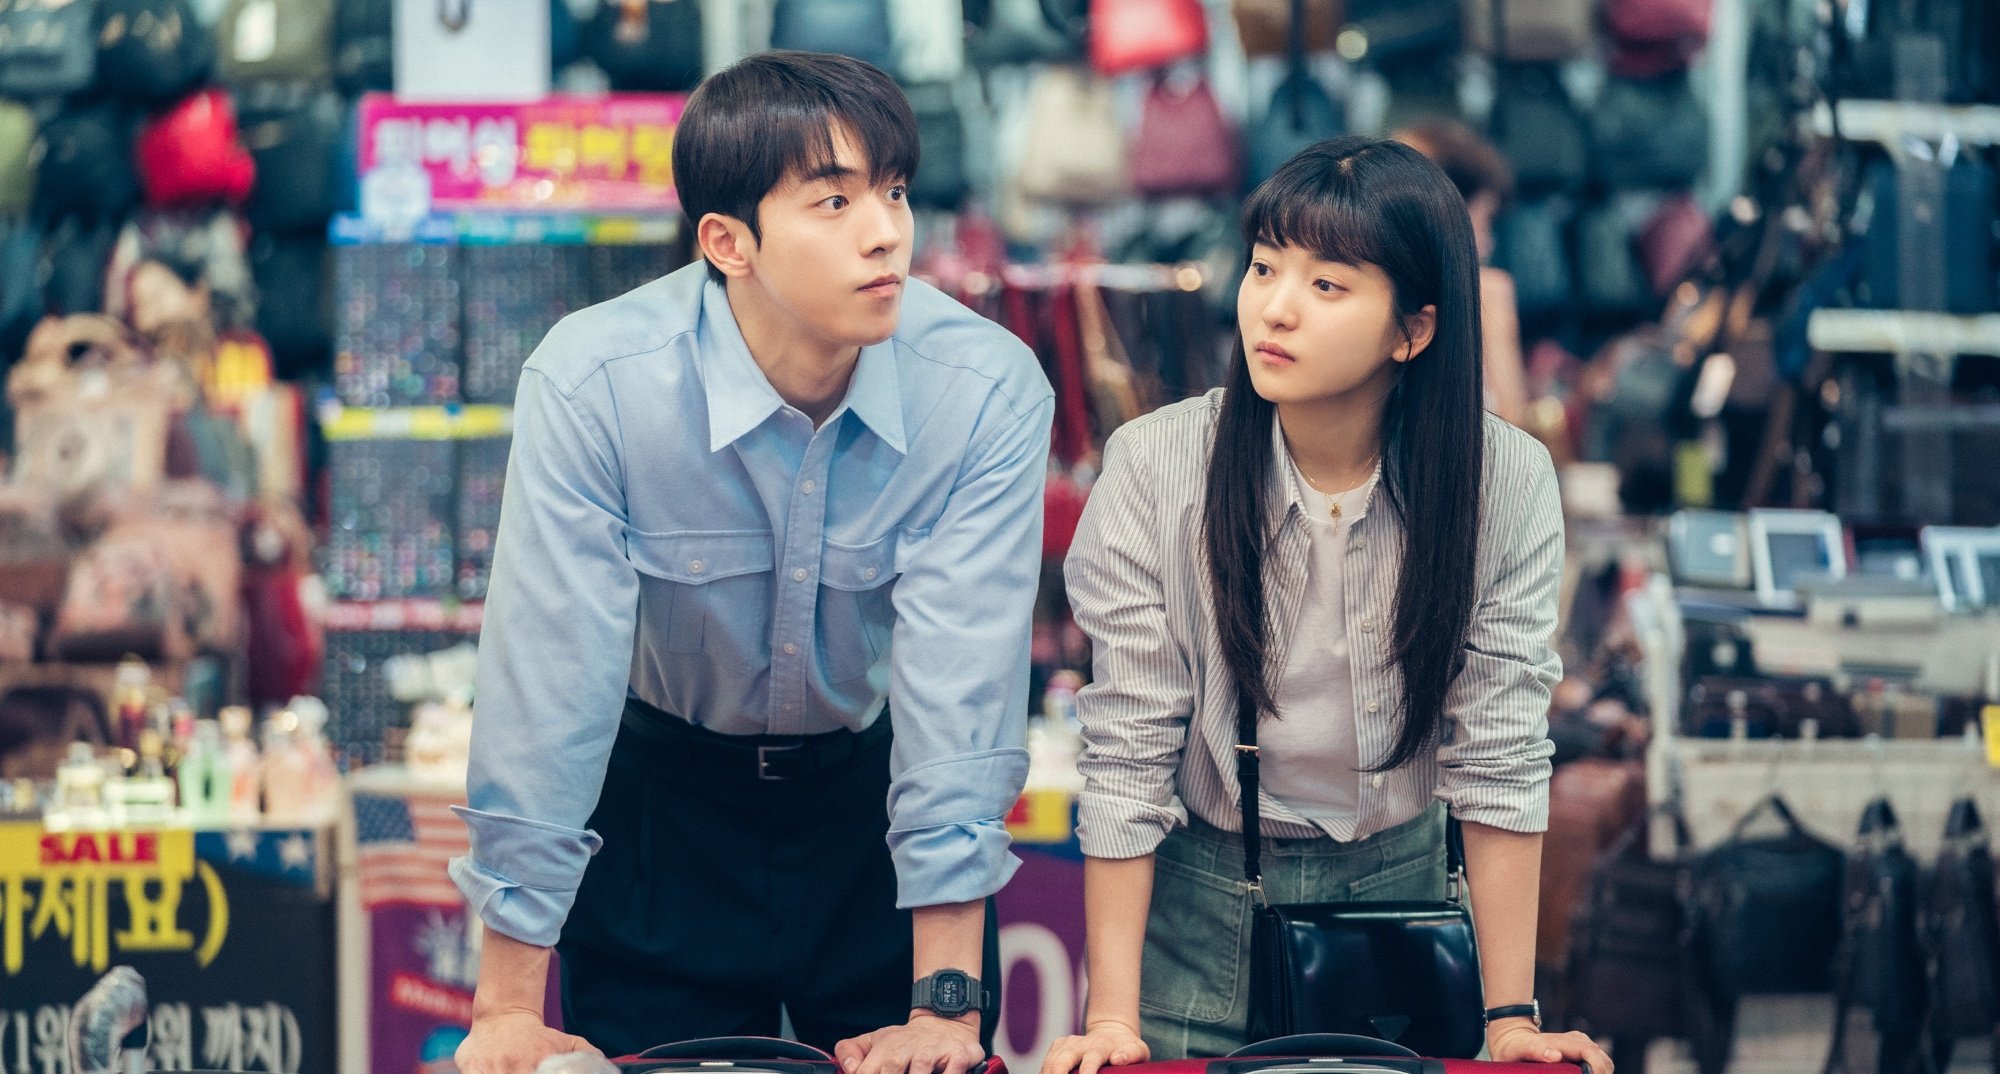 Characters Yi-jin and Hee-do in 'Twenty-Five Twenty-One' finale buying red suitcases.